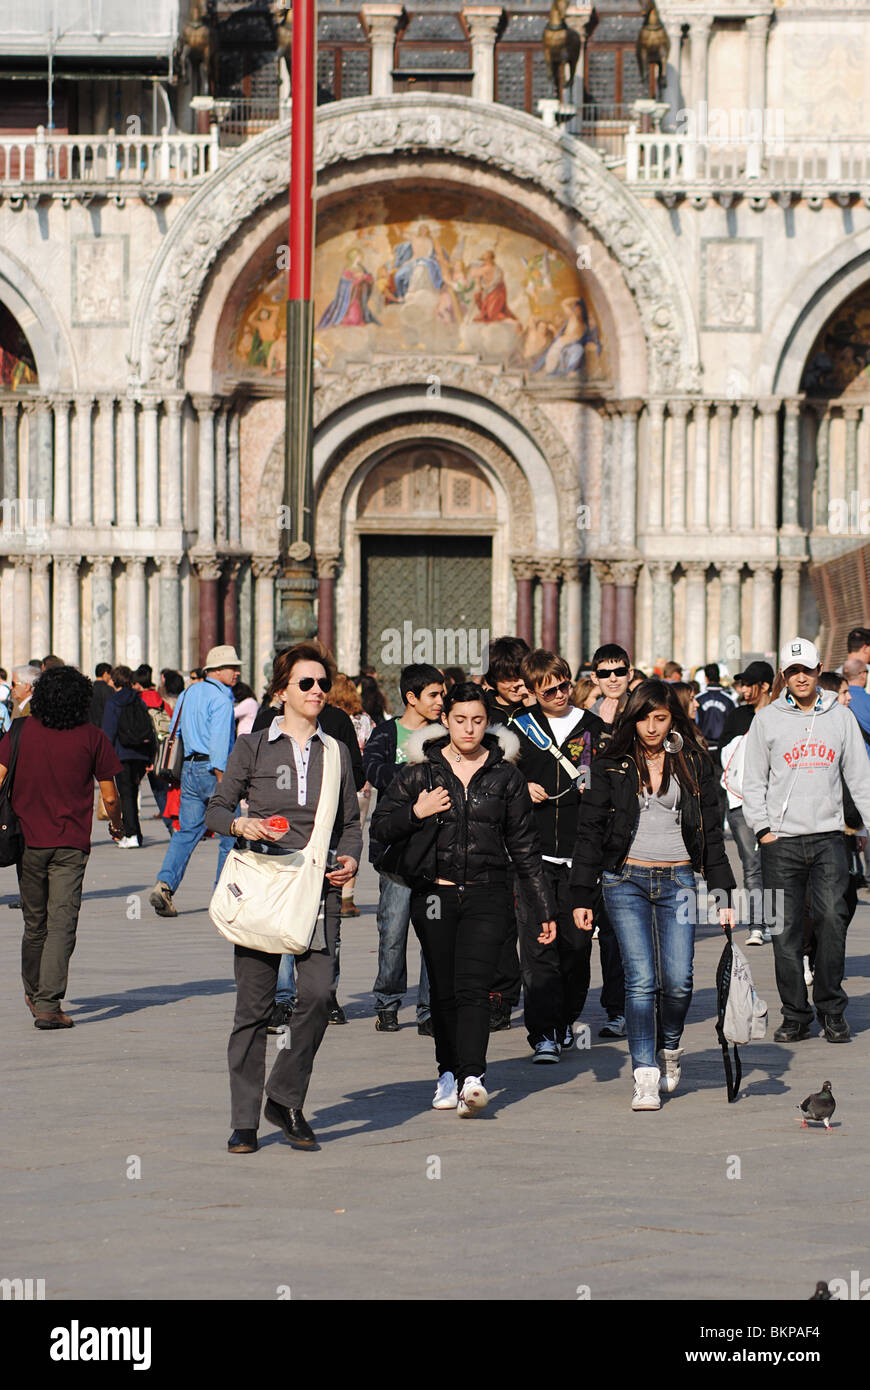 Tour group in St Mark's Square, Venice, Italy Stock Photo